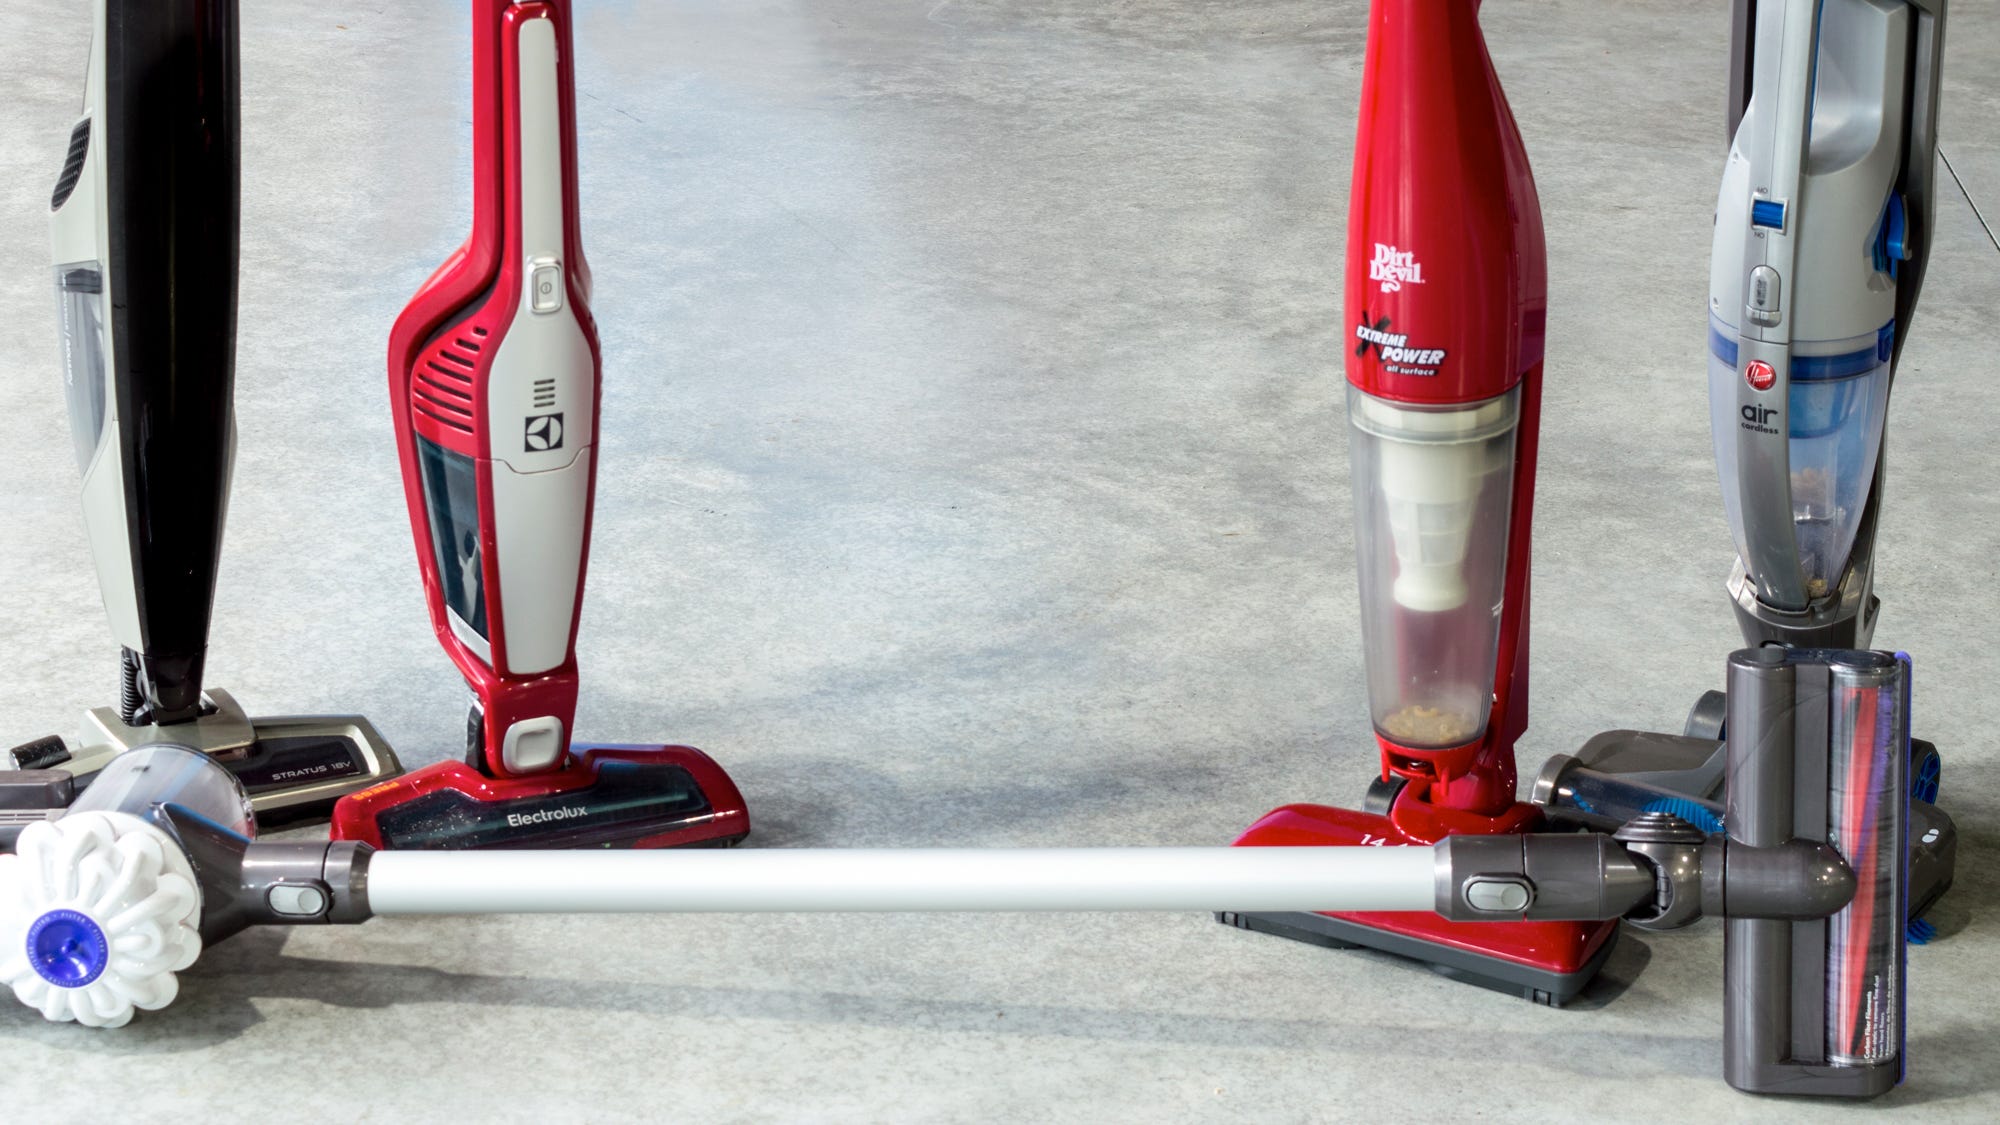 The Best Cordless Vacuums Of 2020, Best Dyson Cordless Vacuum For Hardwood Floors And Pet Hair